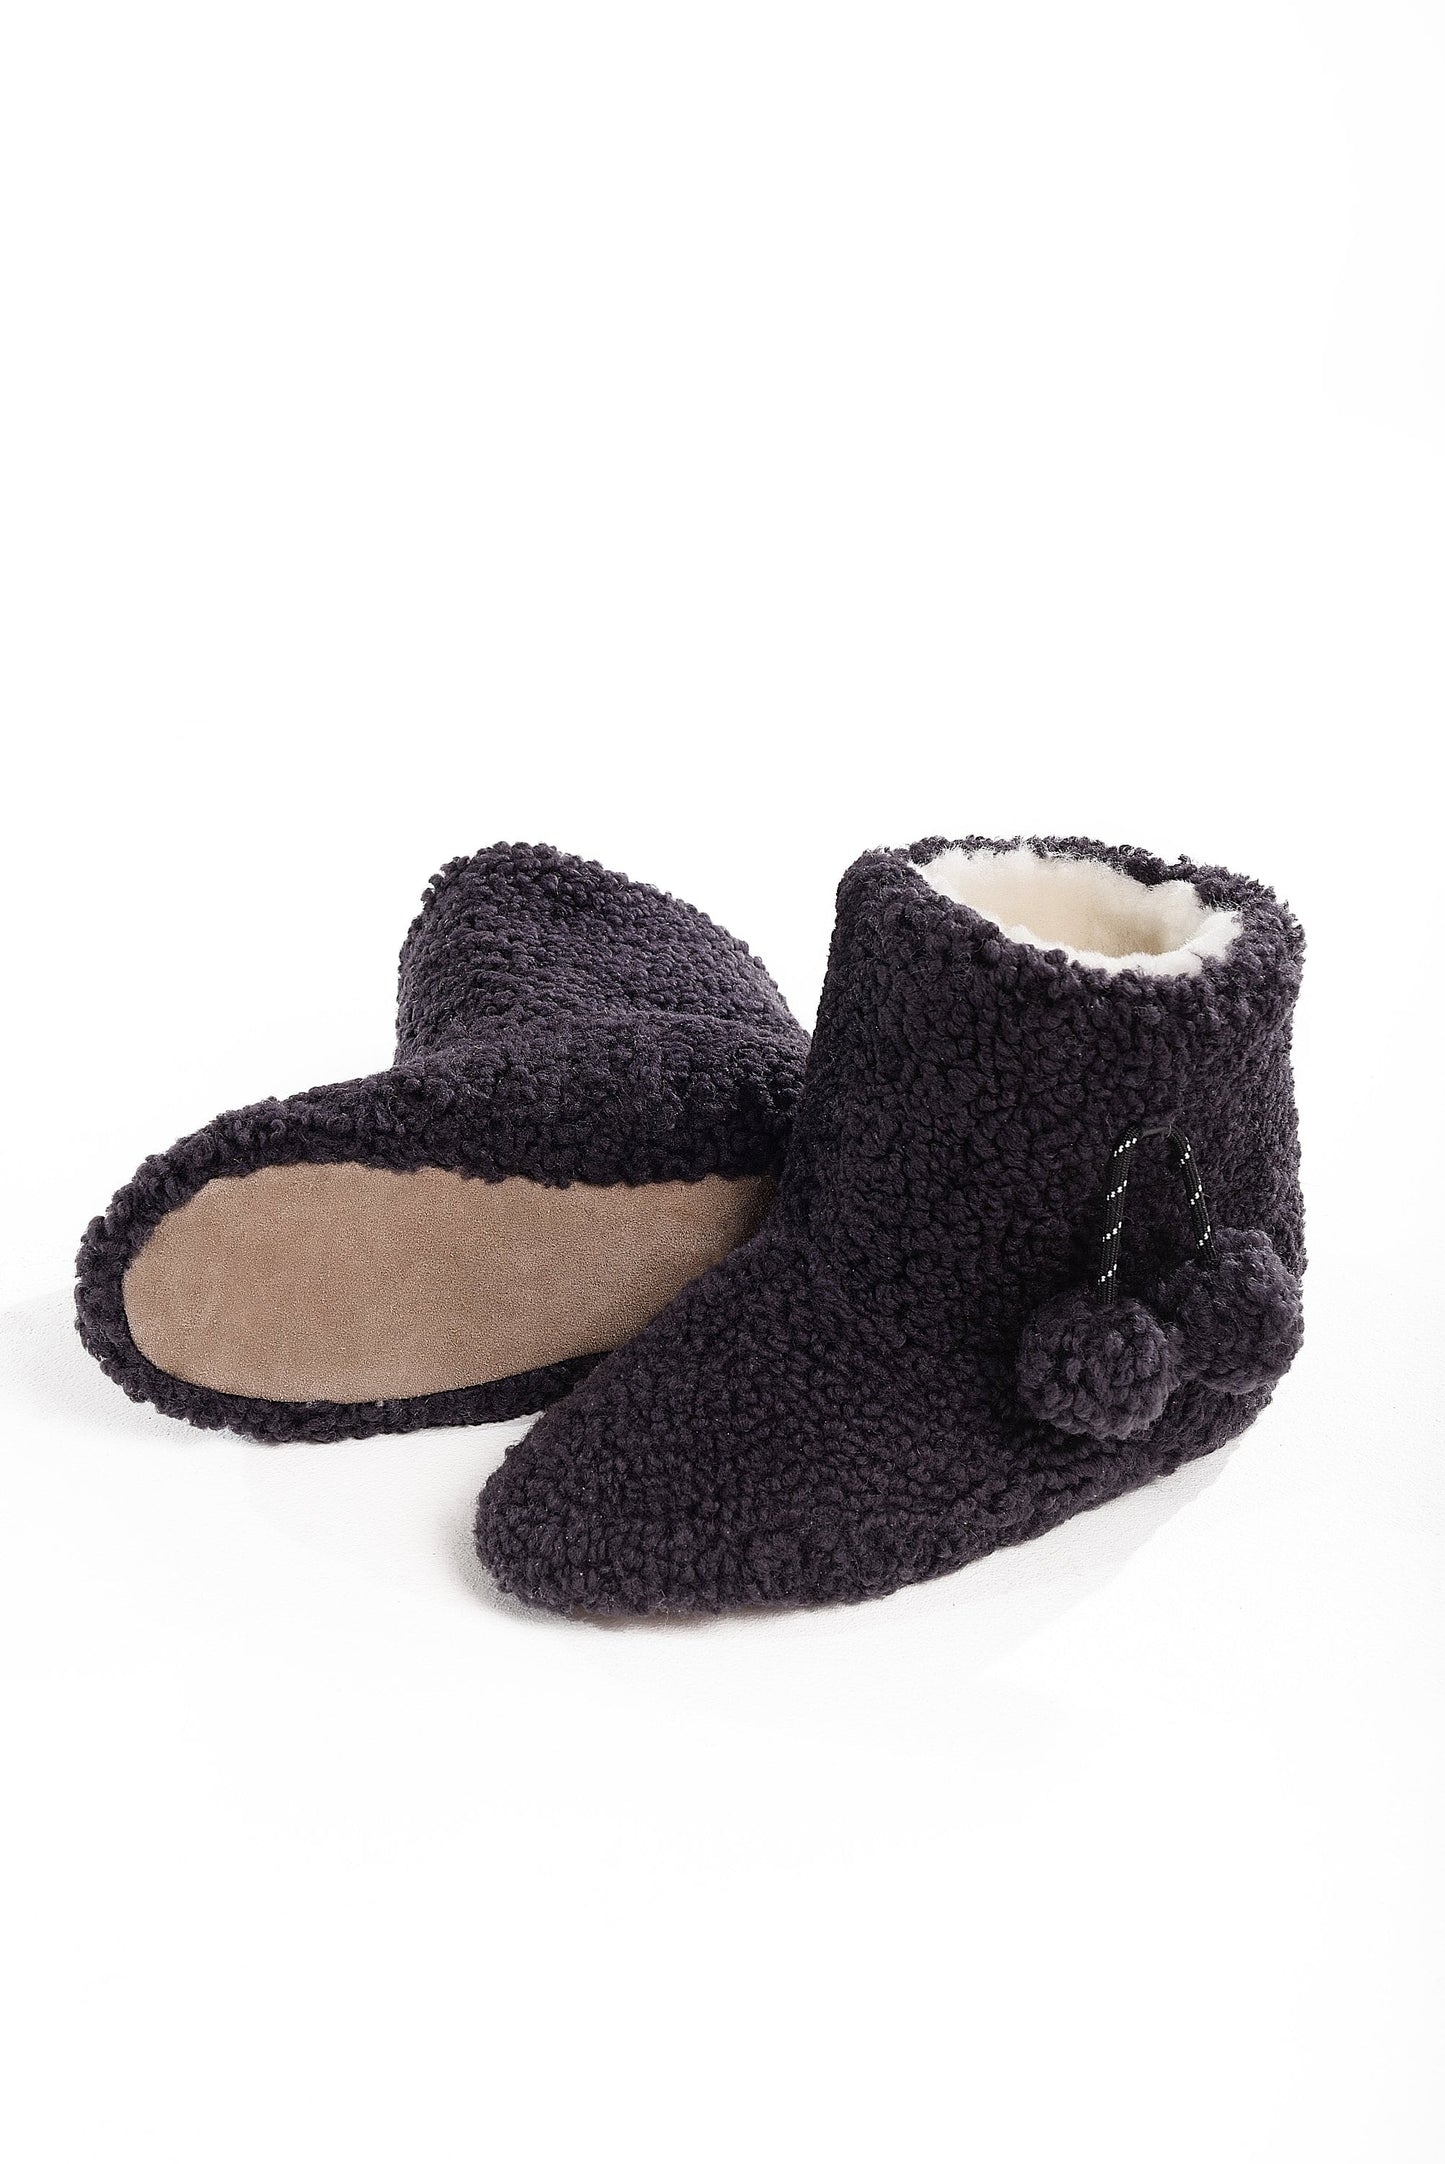 Real Womens Boucle Sheepskin Slipper Home Boots in Aubergine Color With Pom Pom